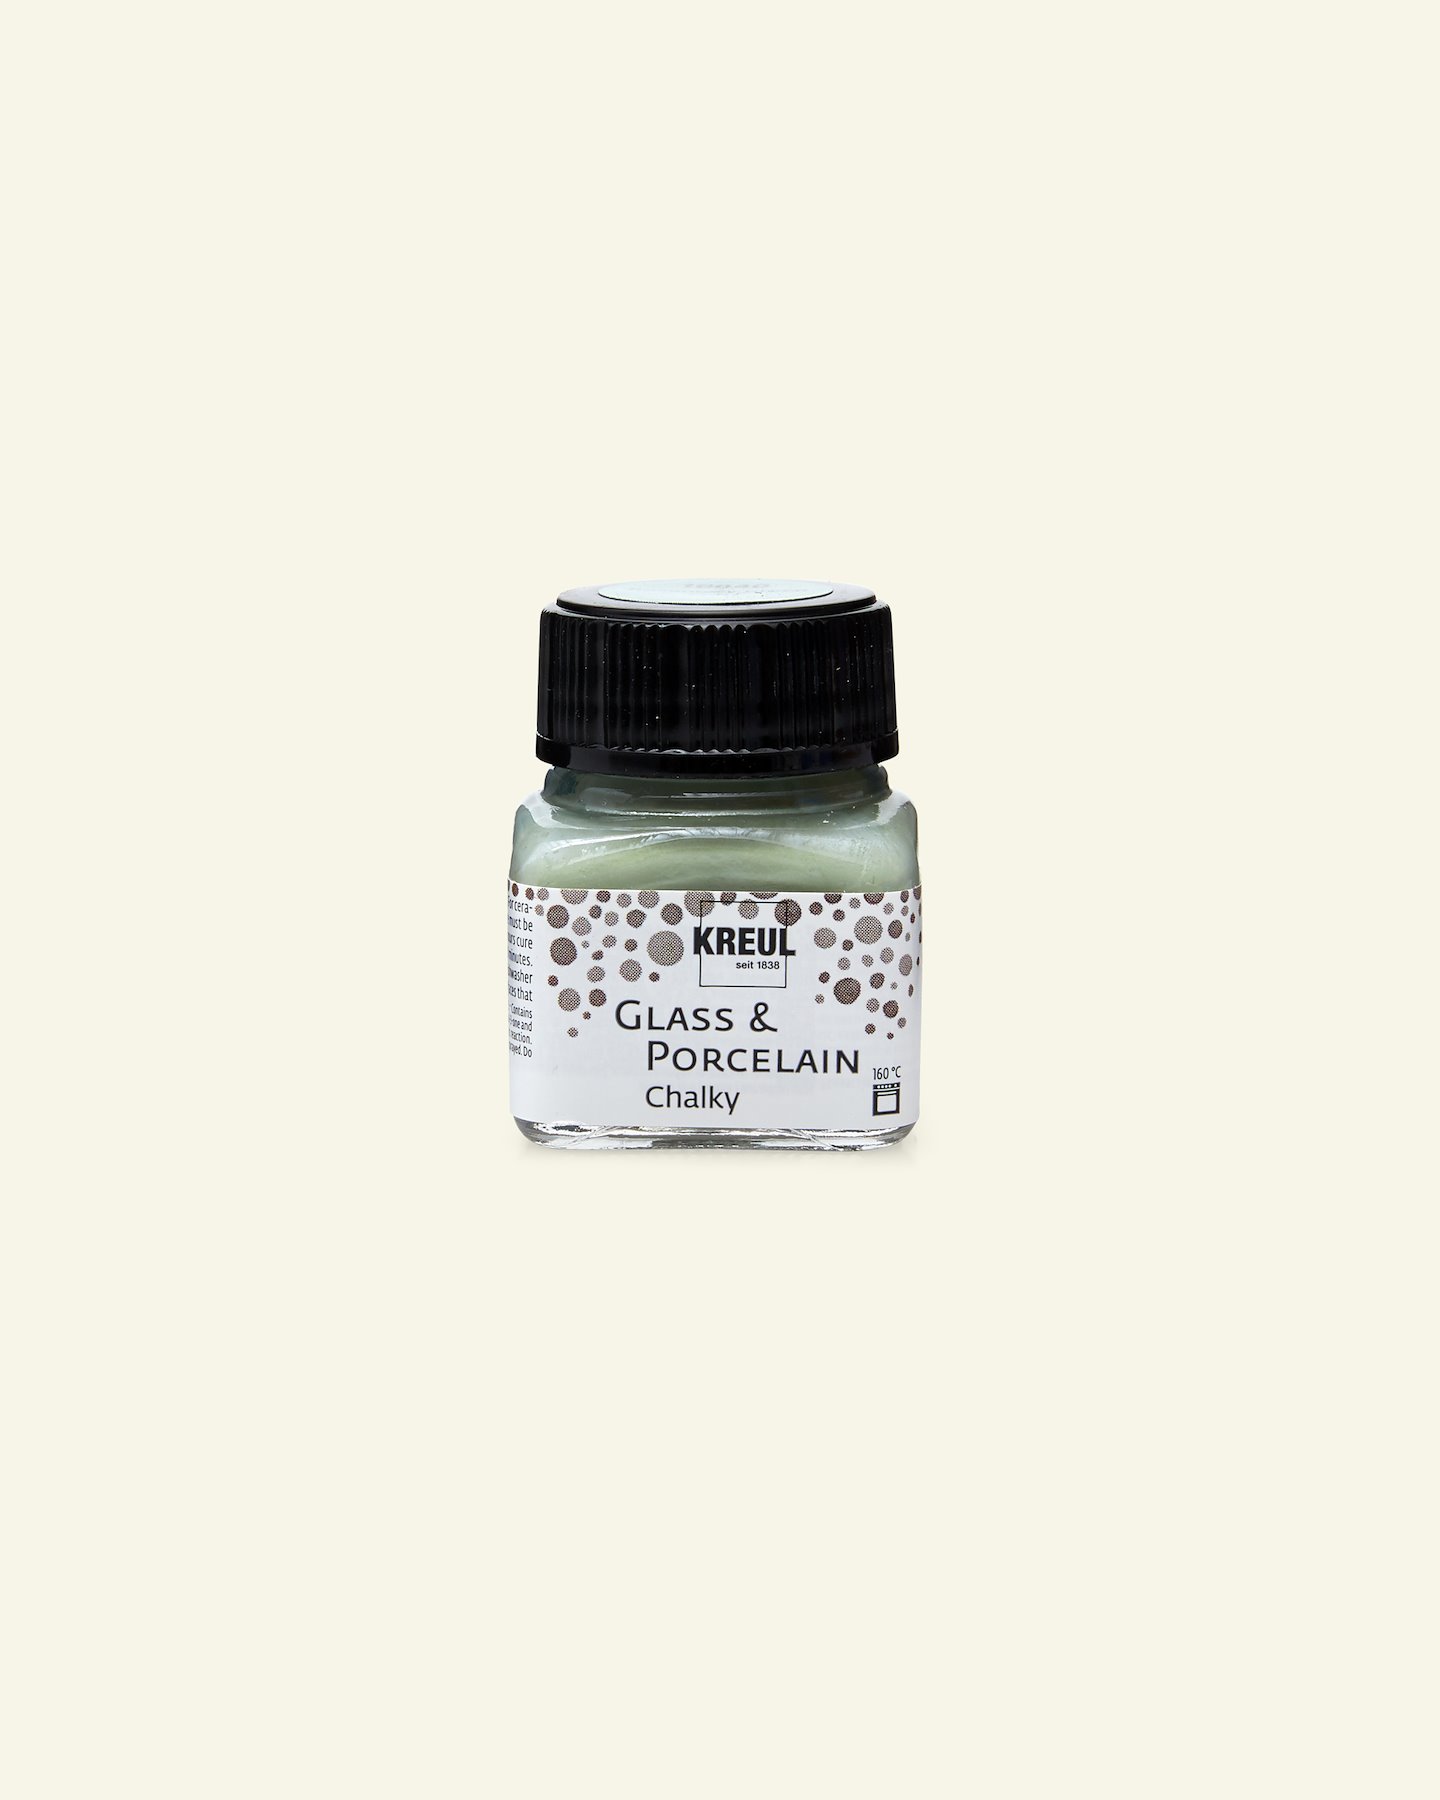 Glass&porcelain paint chalky 20ml l.gree 31274_pack